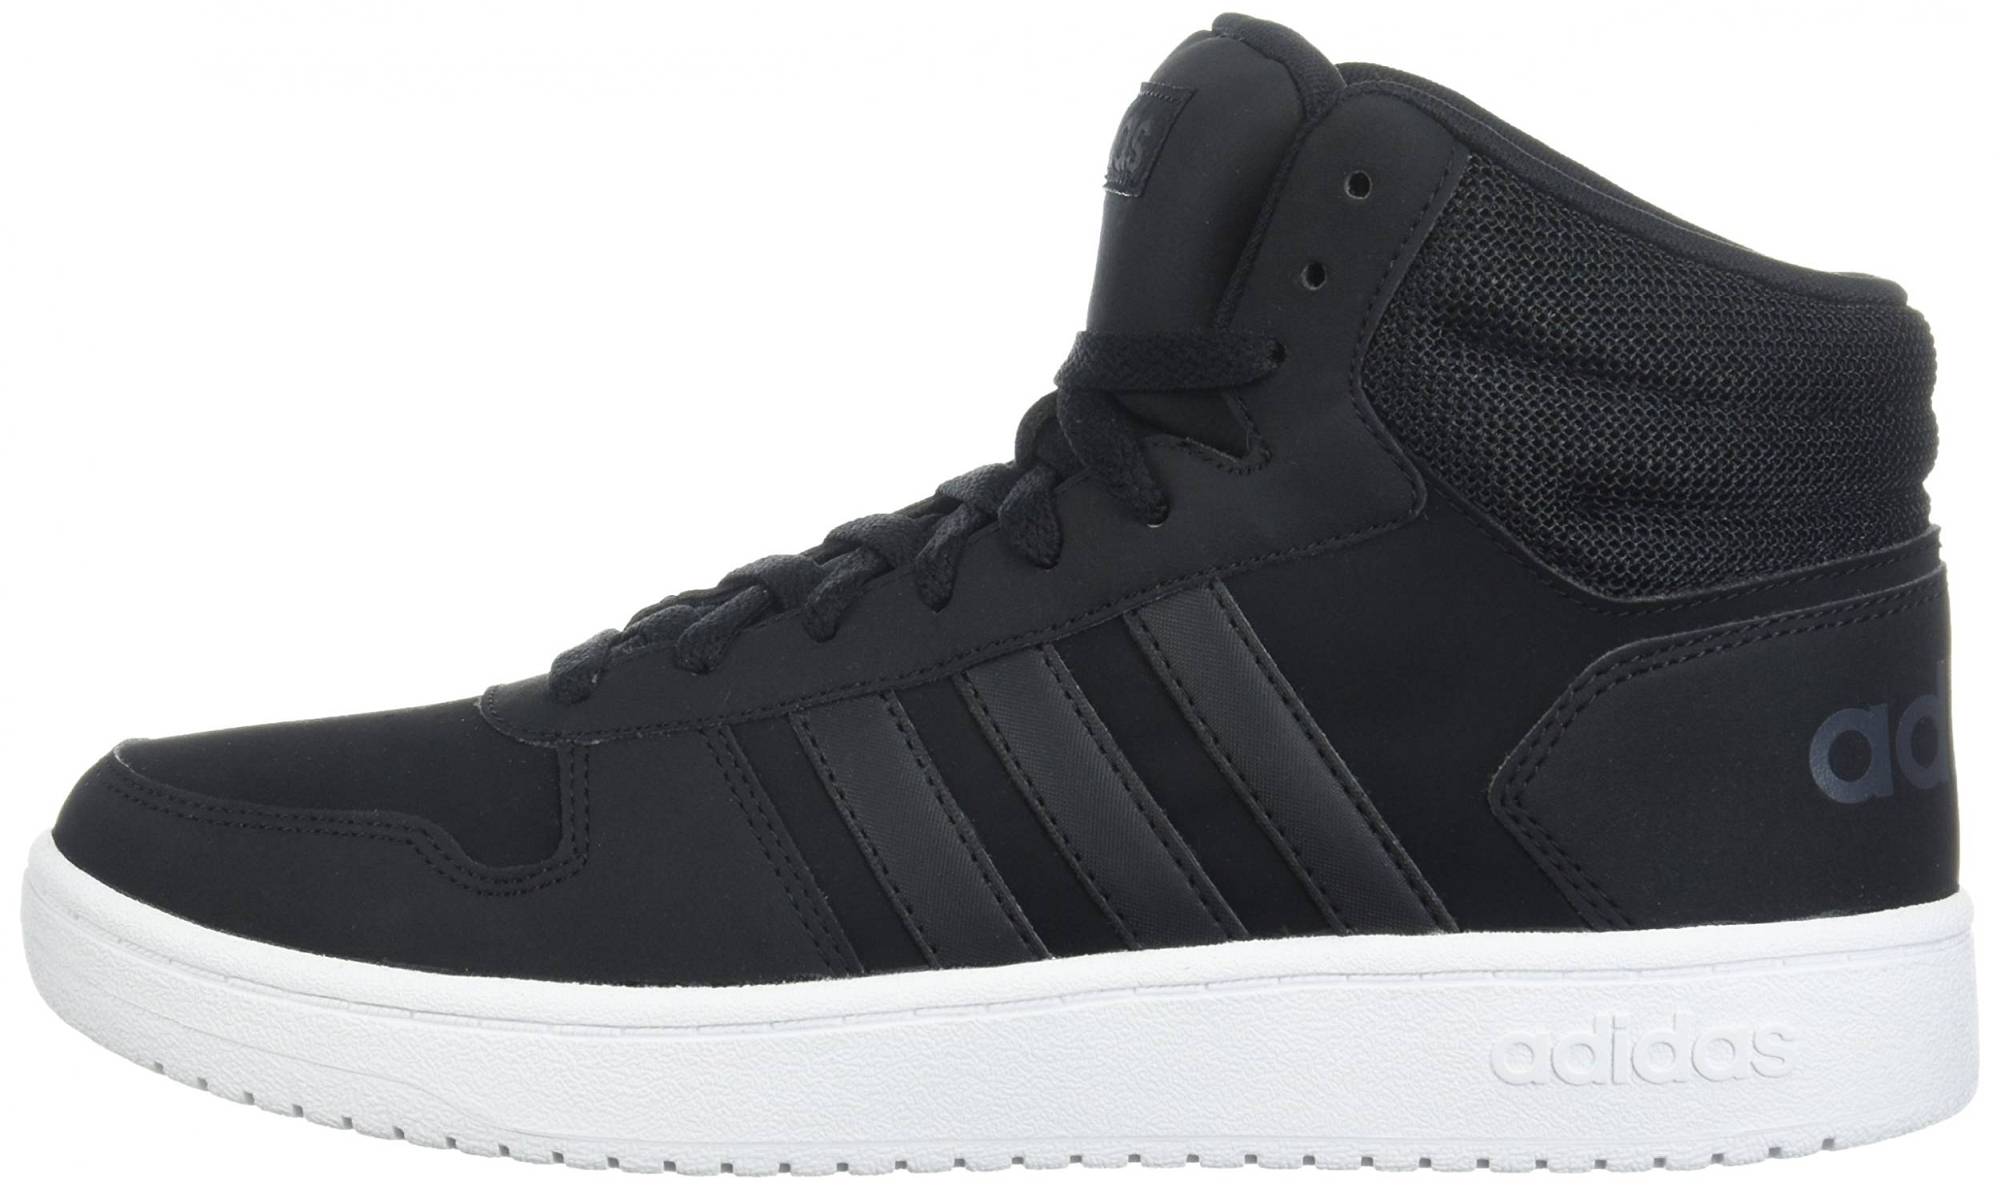 Adidas Hoops 2.0 Mid Shoes Reviews & Reasons To Buy